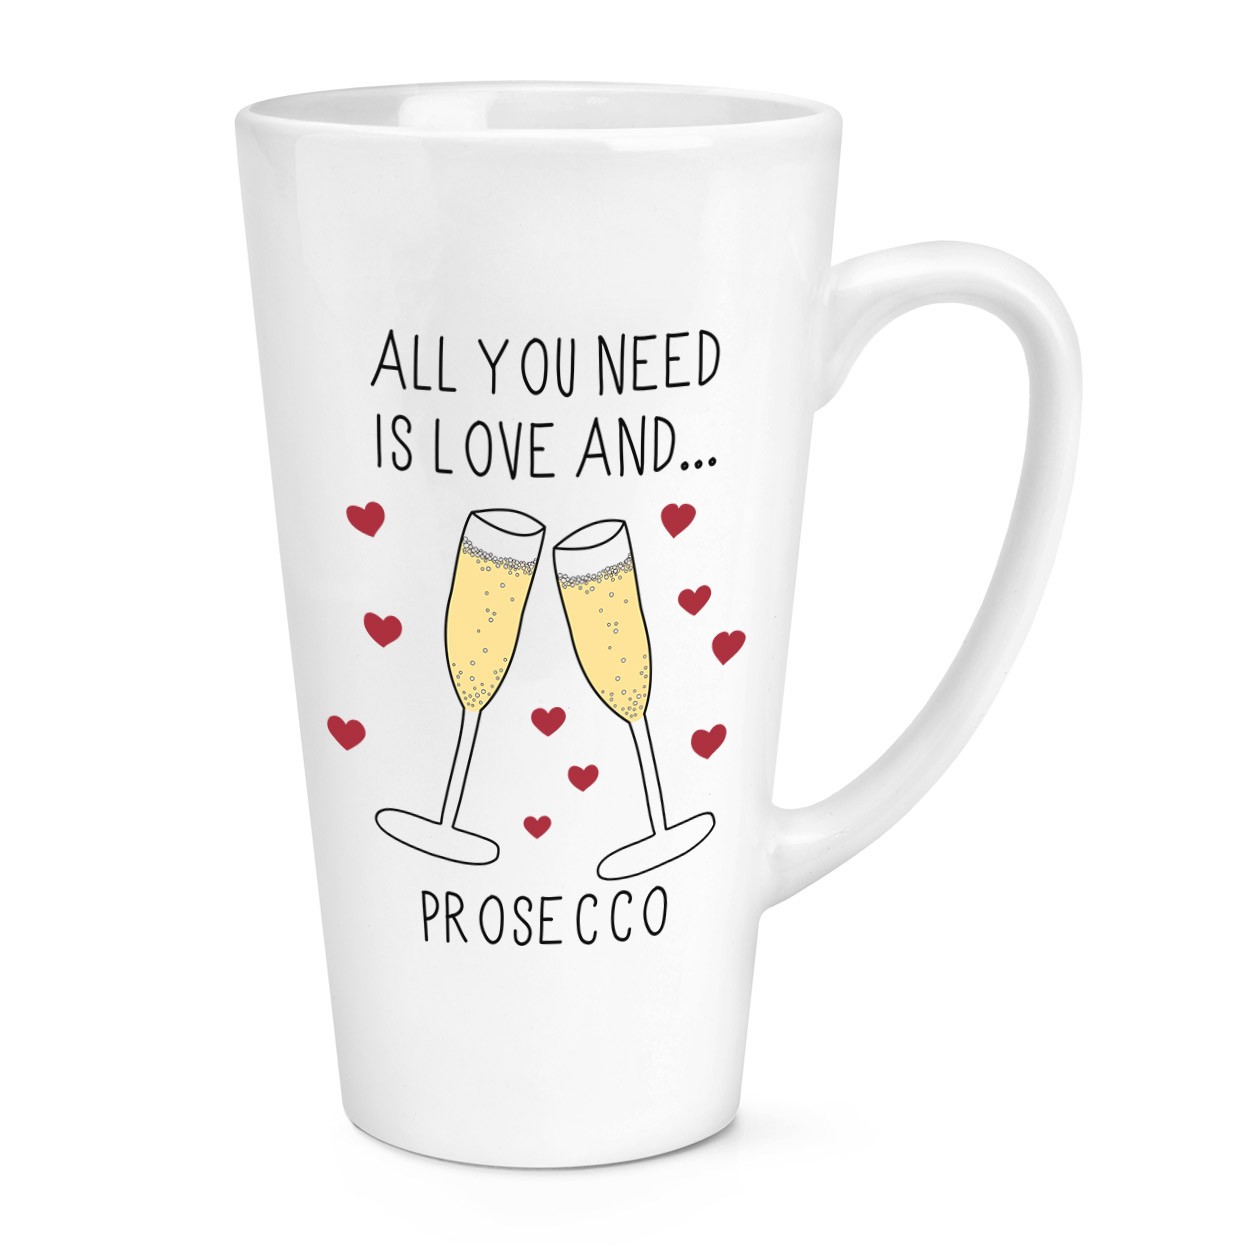 All You Need Is Love And Prosecco 17oz Large Latte Mug Cup